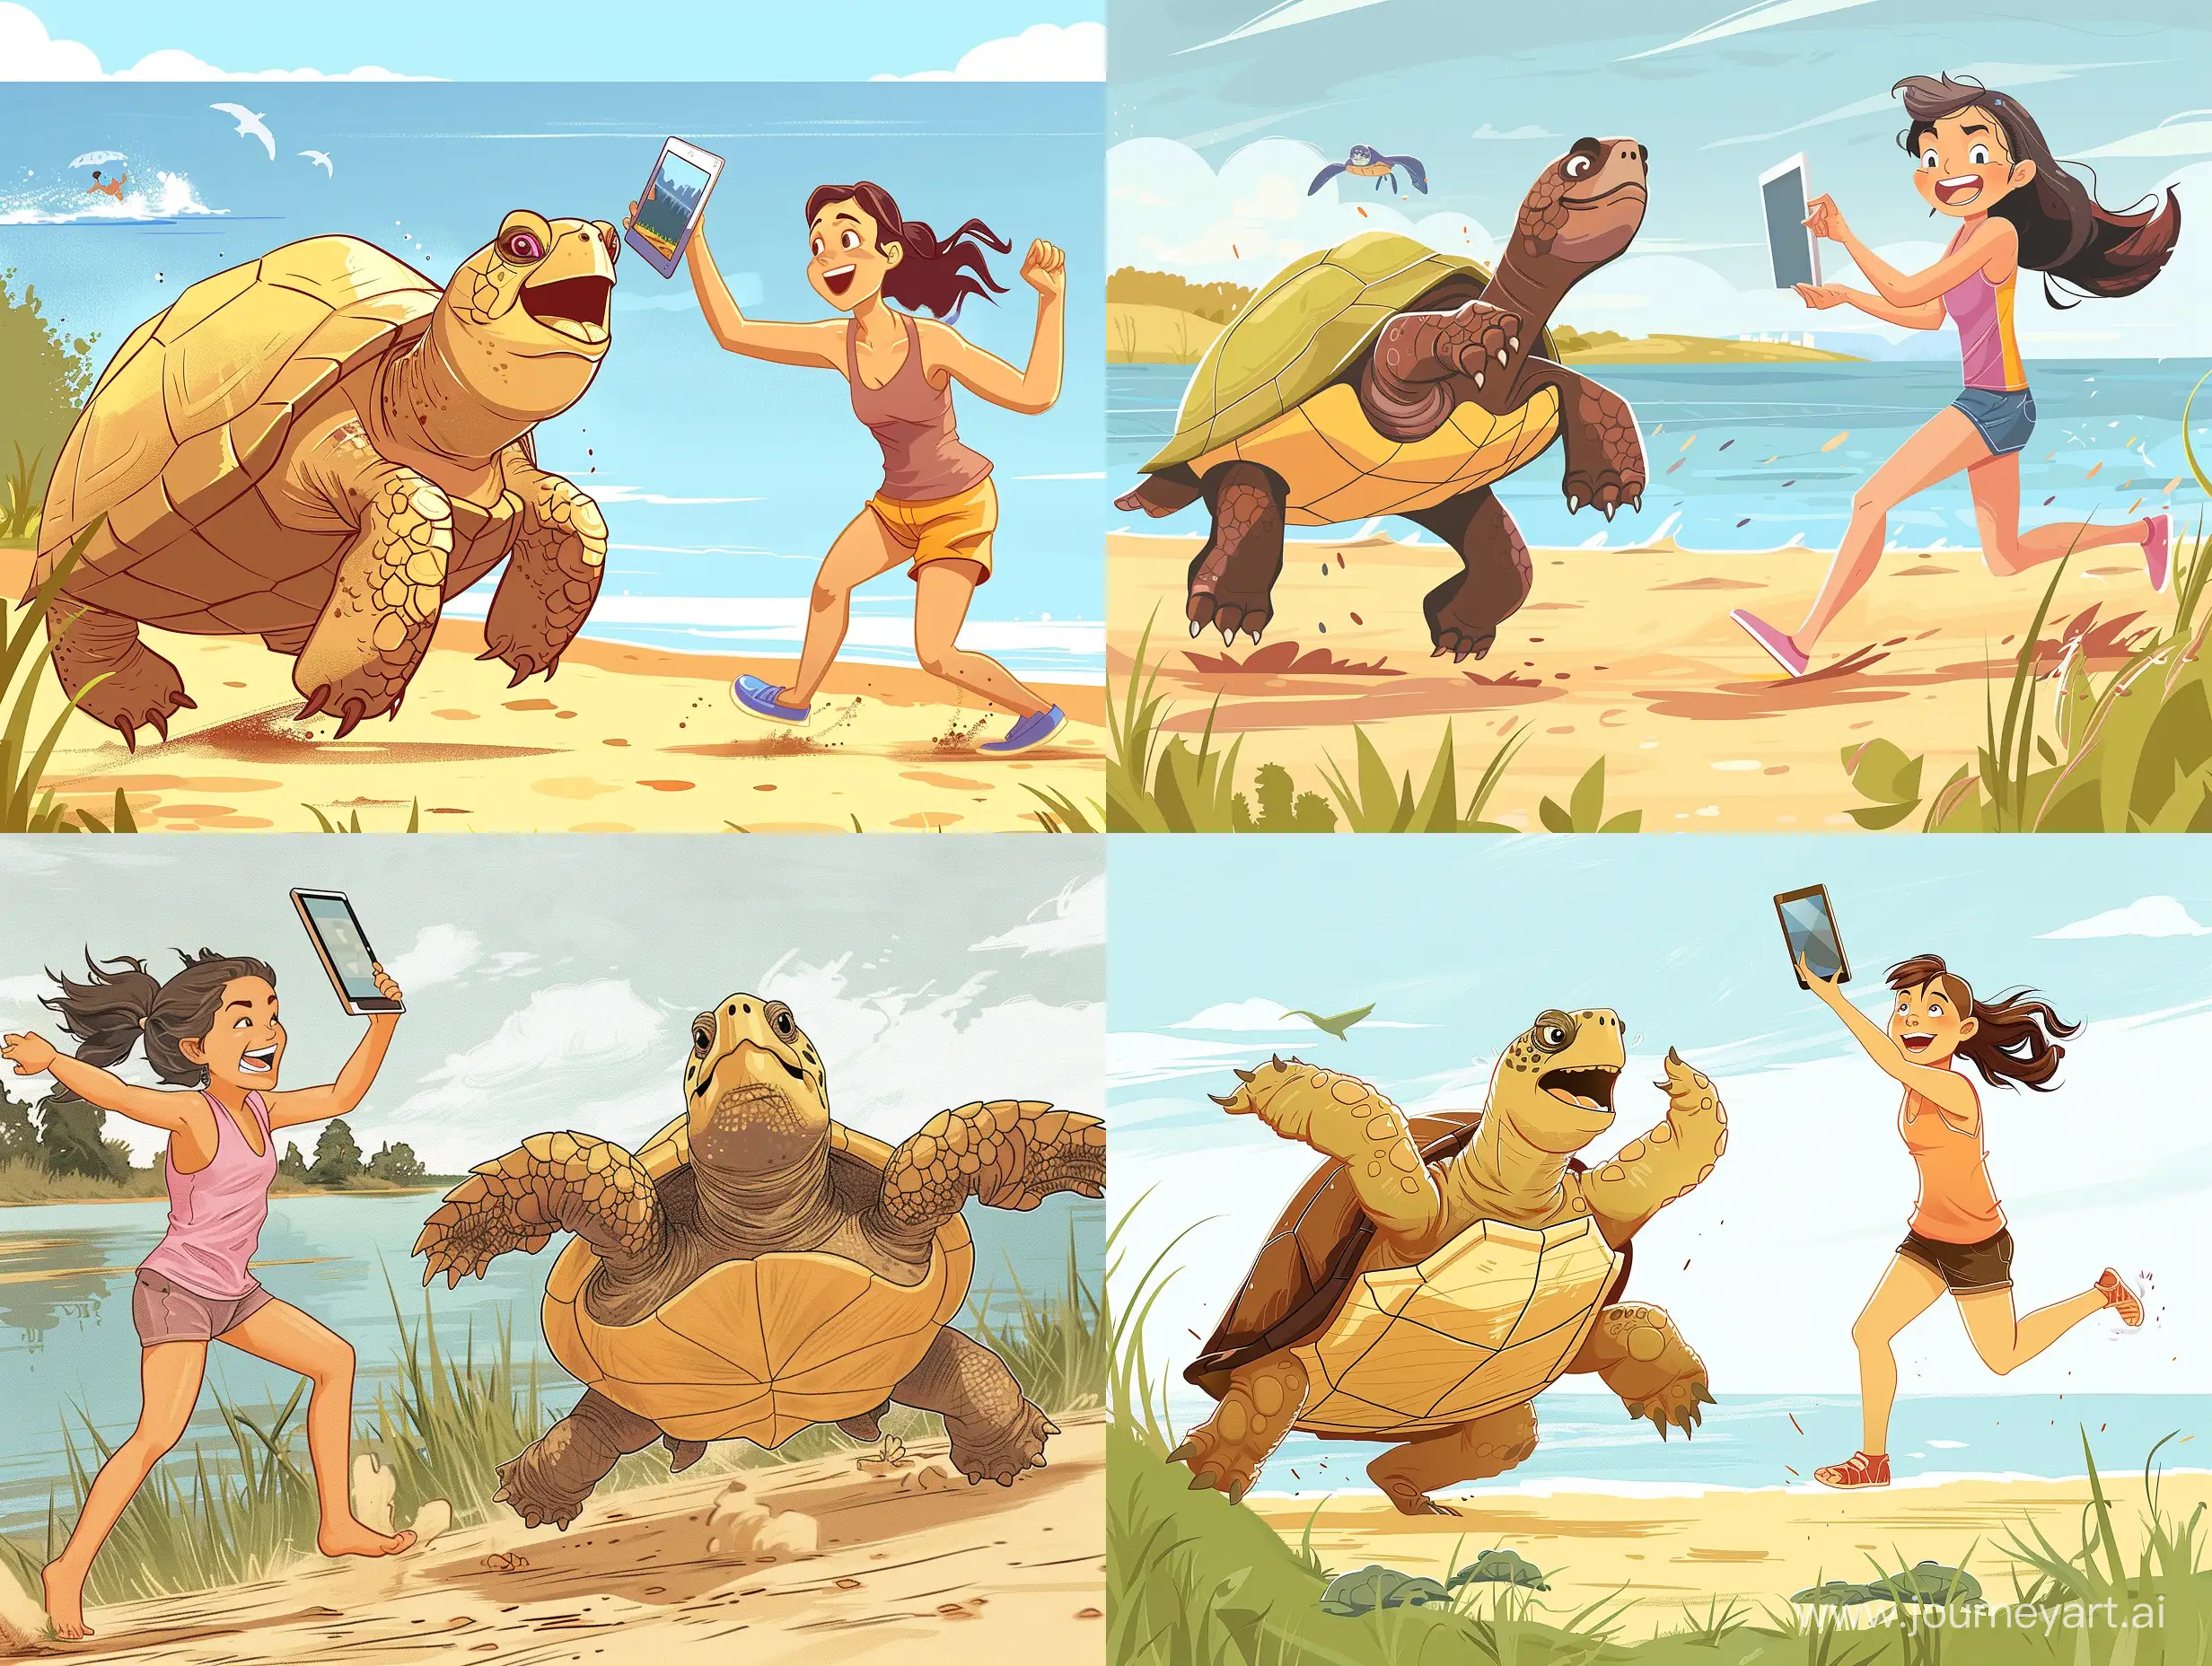 landscape format, sideview, summer, hot, lake shore, a big turtle is running hard on its hind legs, a jolly girl in a tank top is chasing it in the same direction, the girl is running with her tablet raised high to take a picture, in Cartoonish Illustration style 